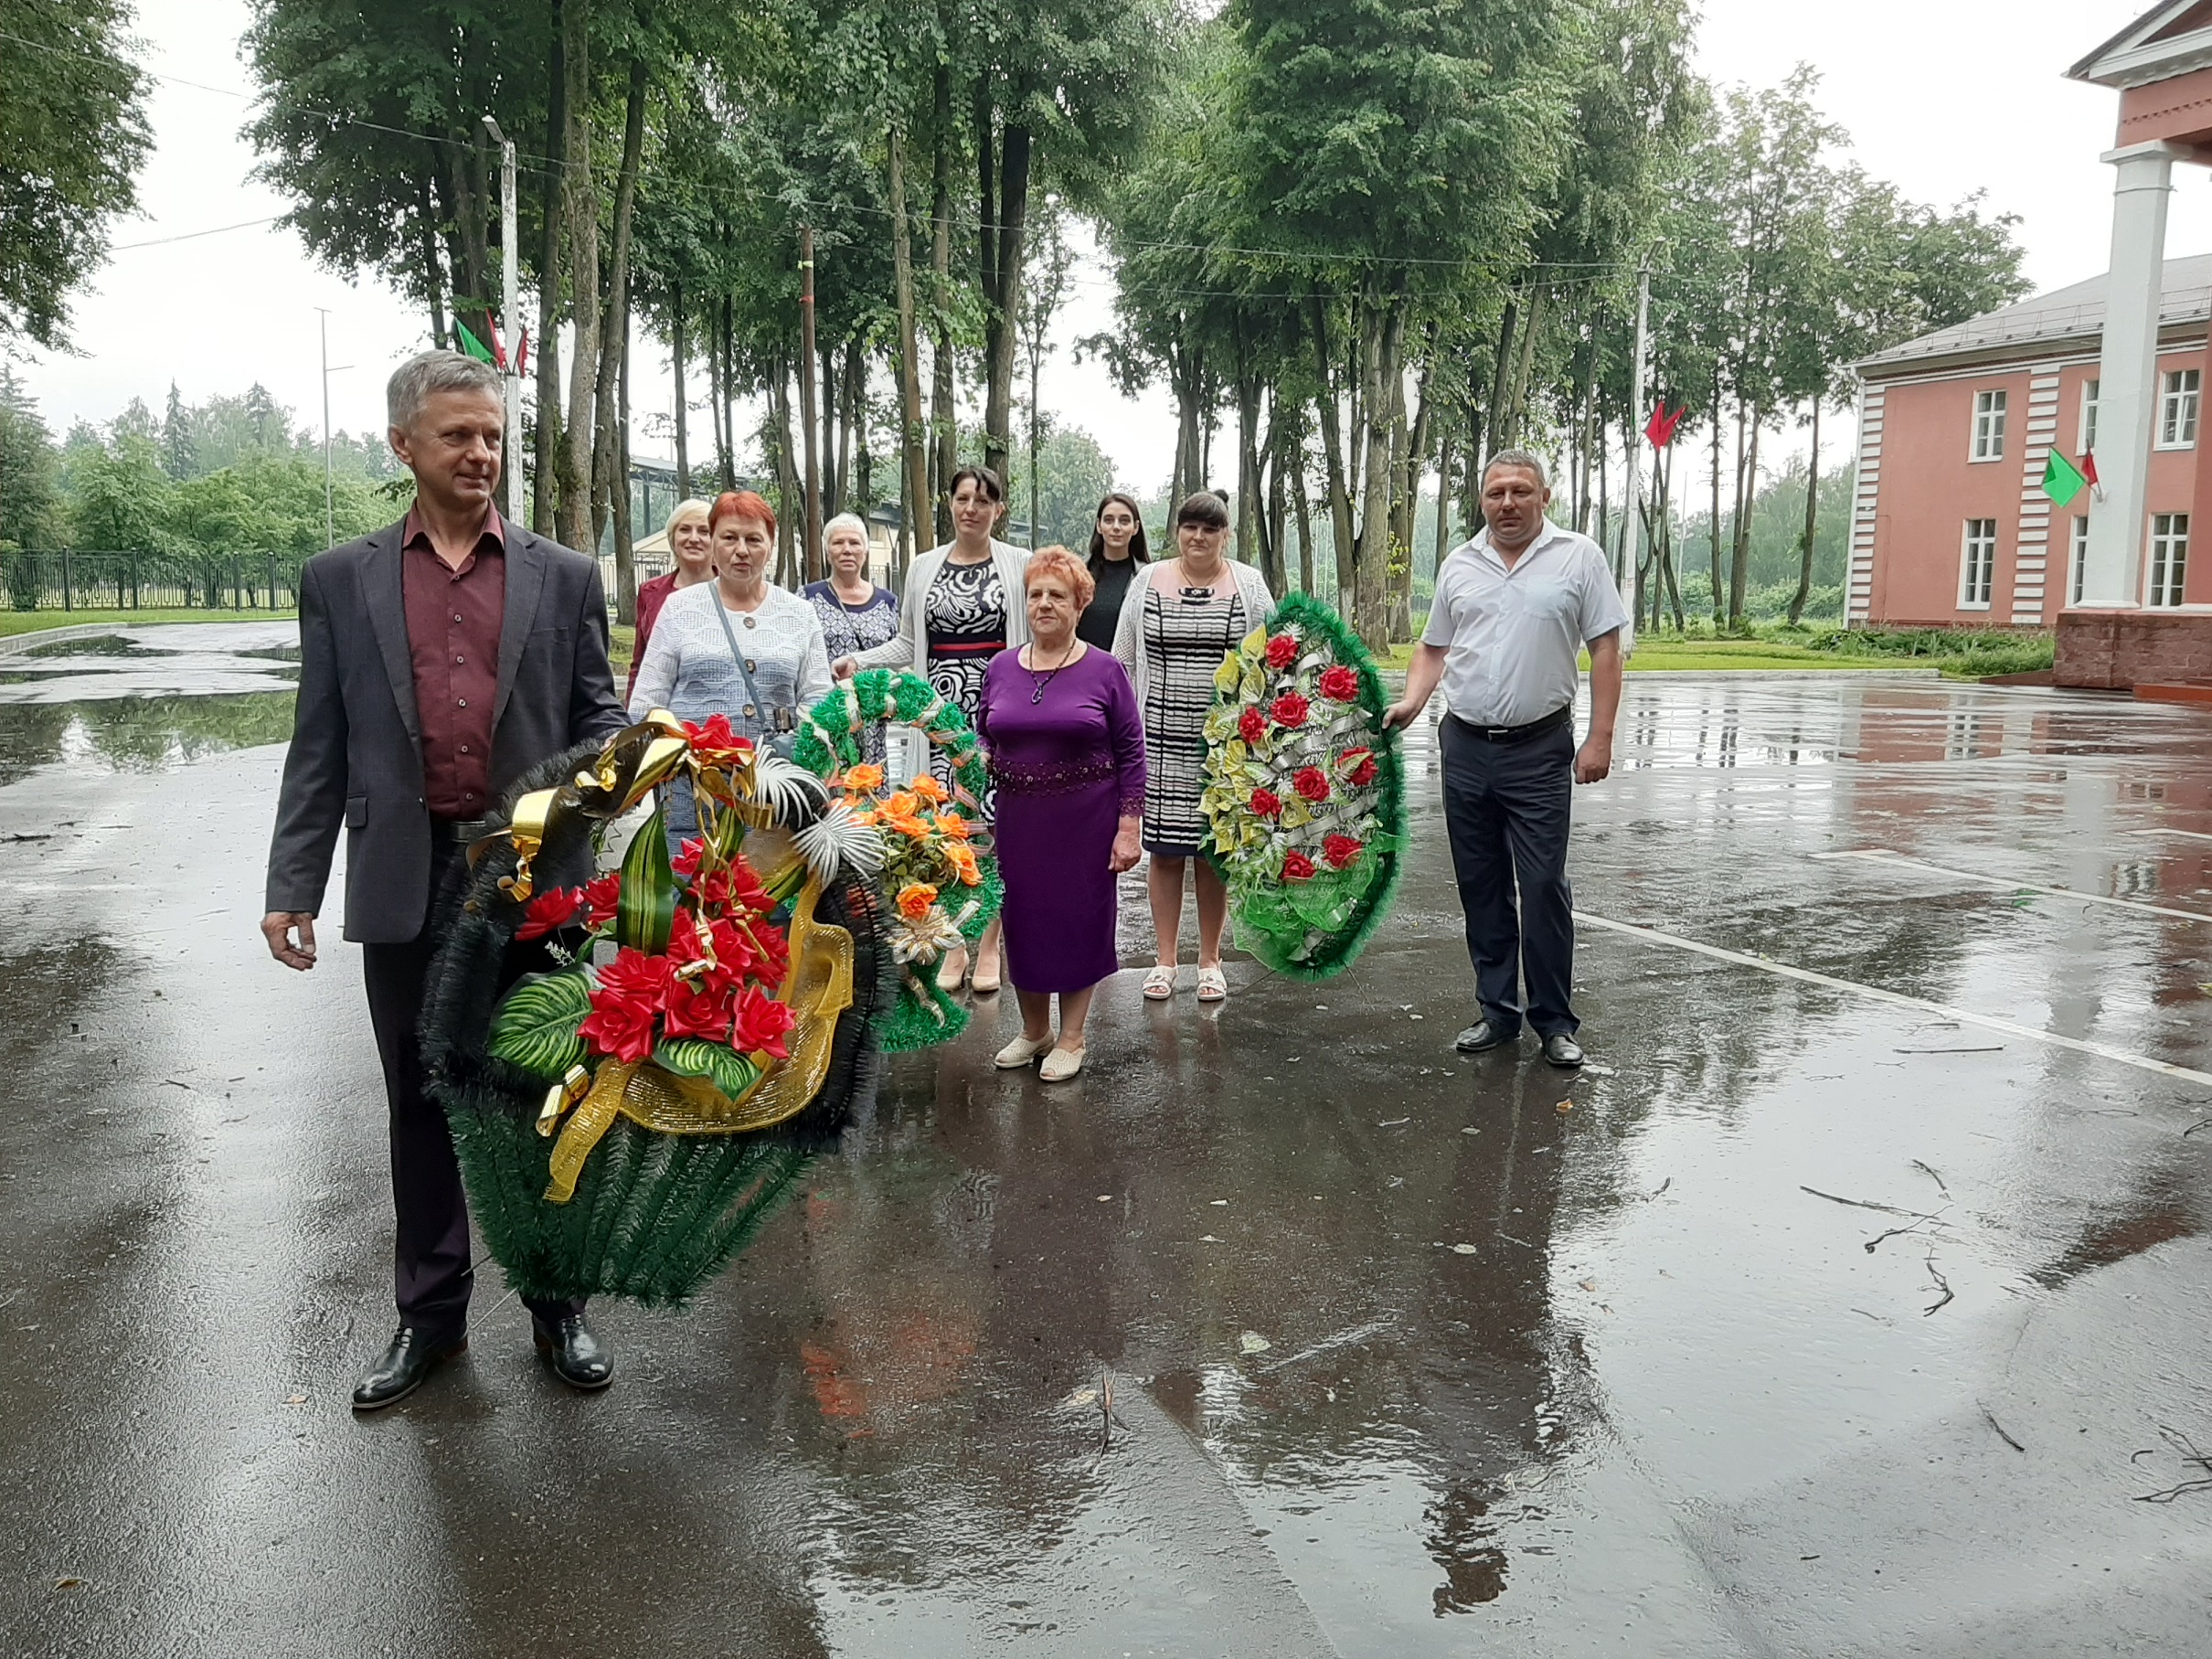 A rally on the occasion of Independence Day and the 76th anniversary of the liberation of Belarus from Nazi invaders